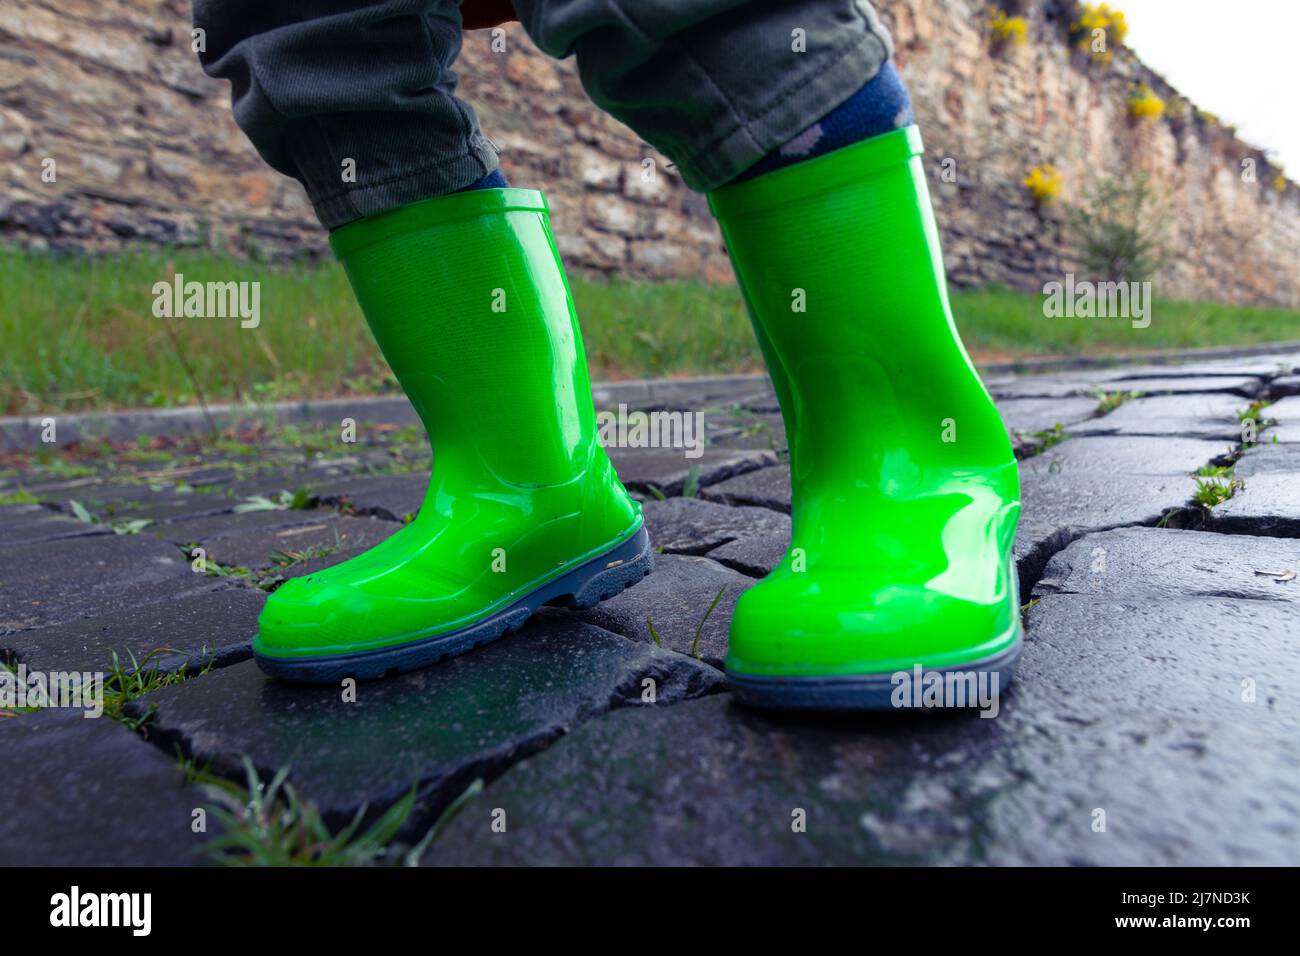 A small child in green rubber boots stands on a paved road. Photo of a child's feet in rubber shoes on the pavement after rain. Stock Photo